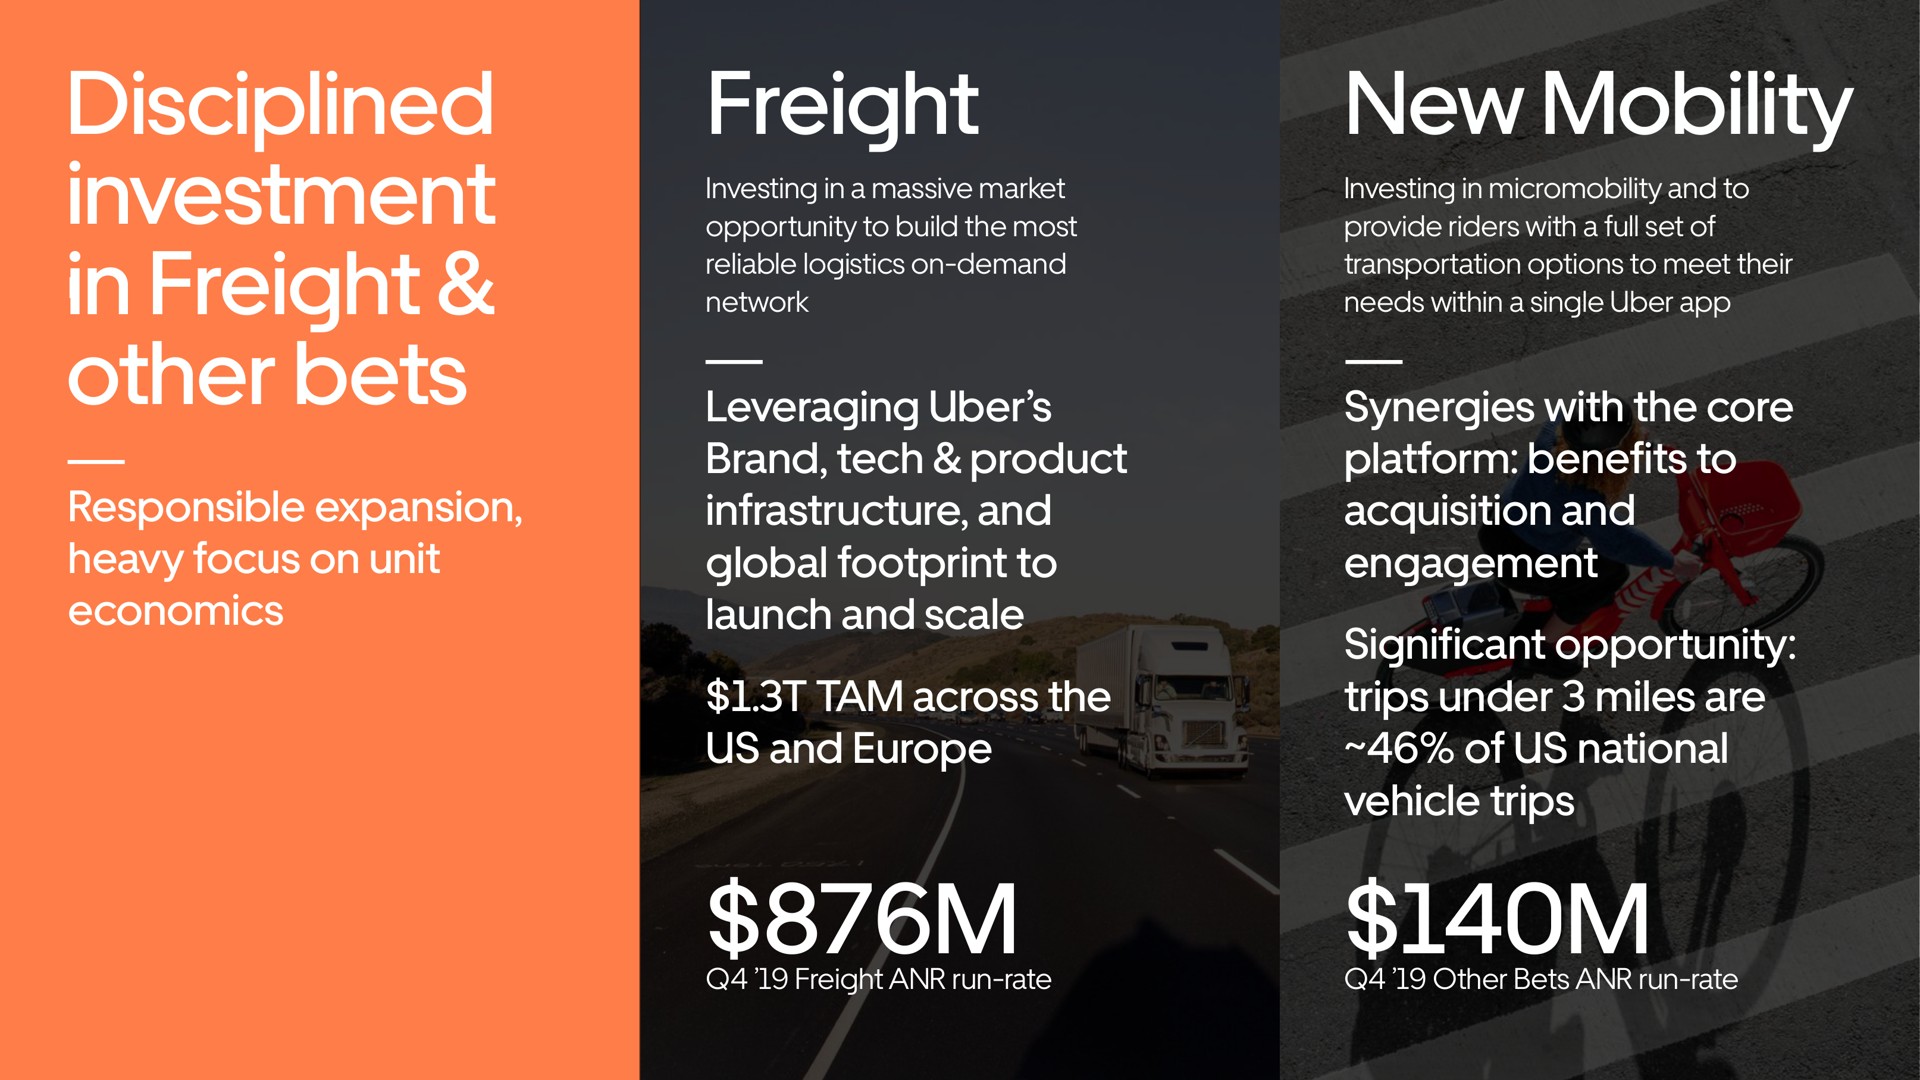 disciplined investment in freight other bets freight new mobility a | Uber